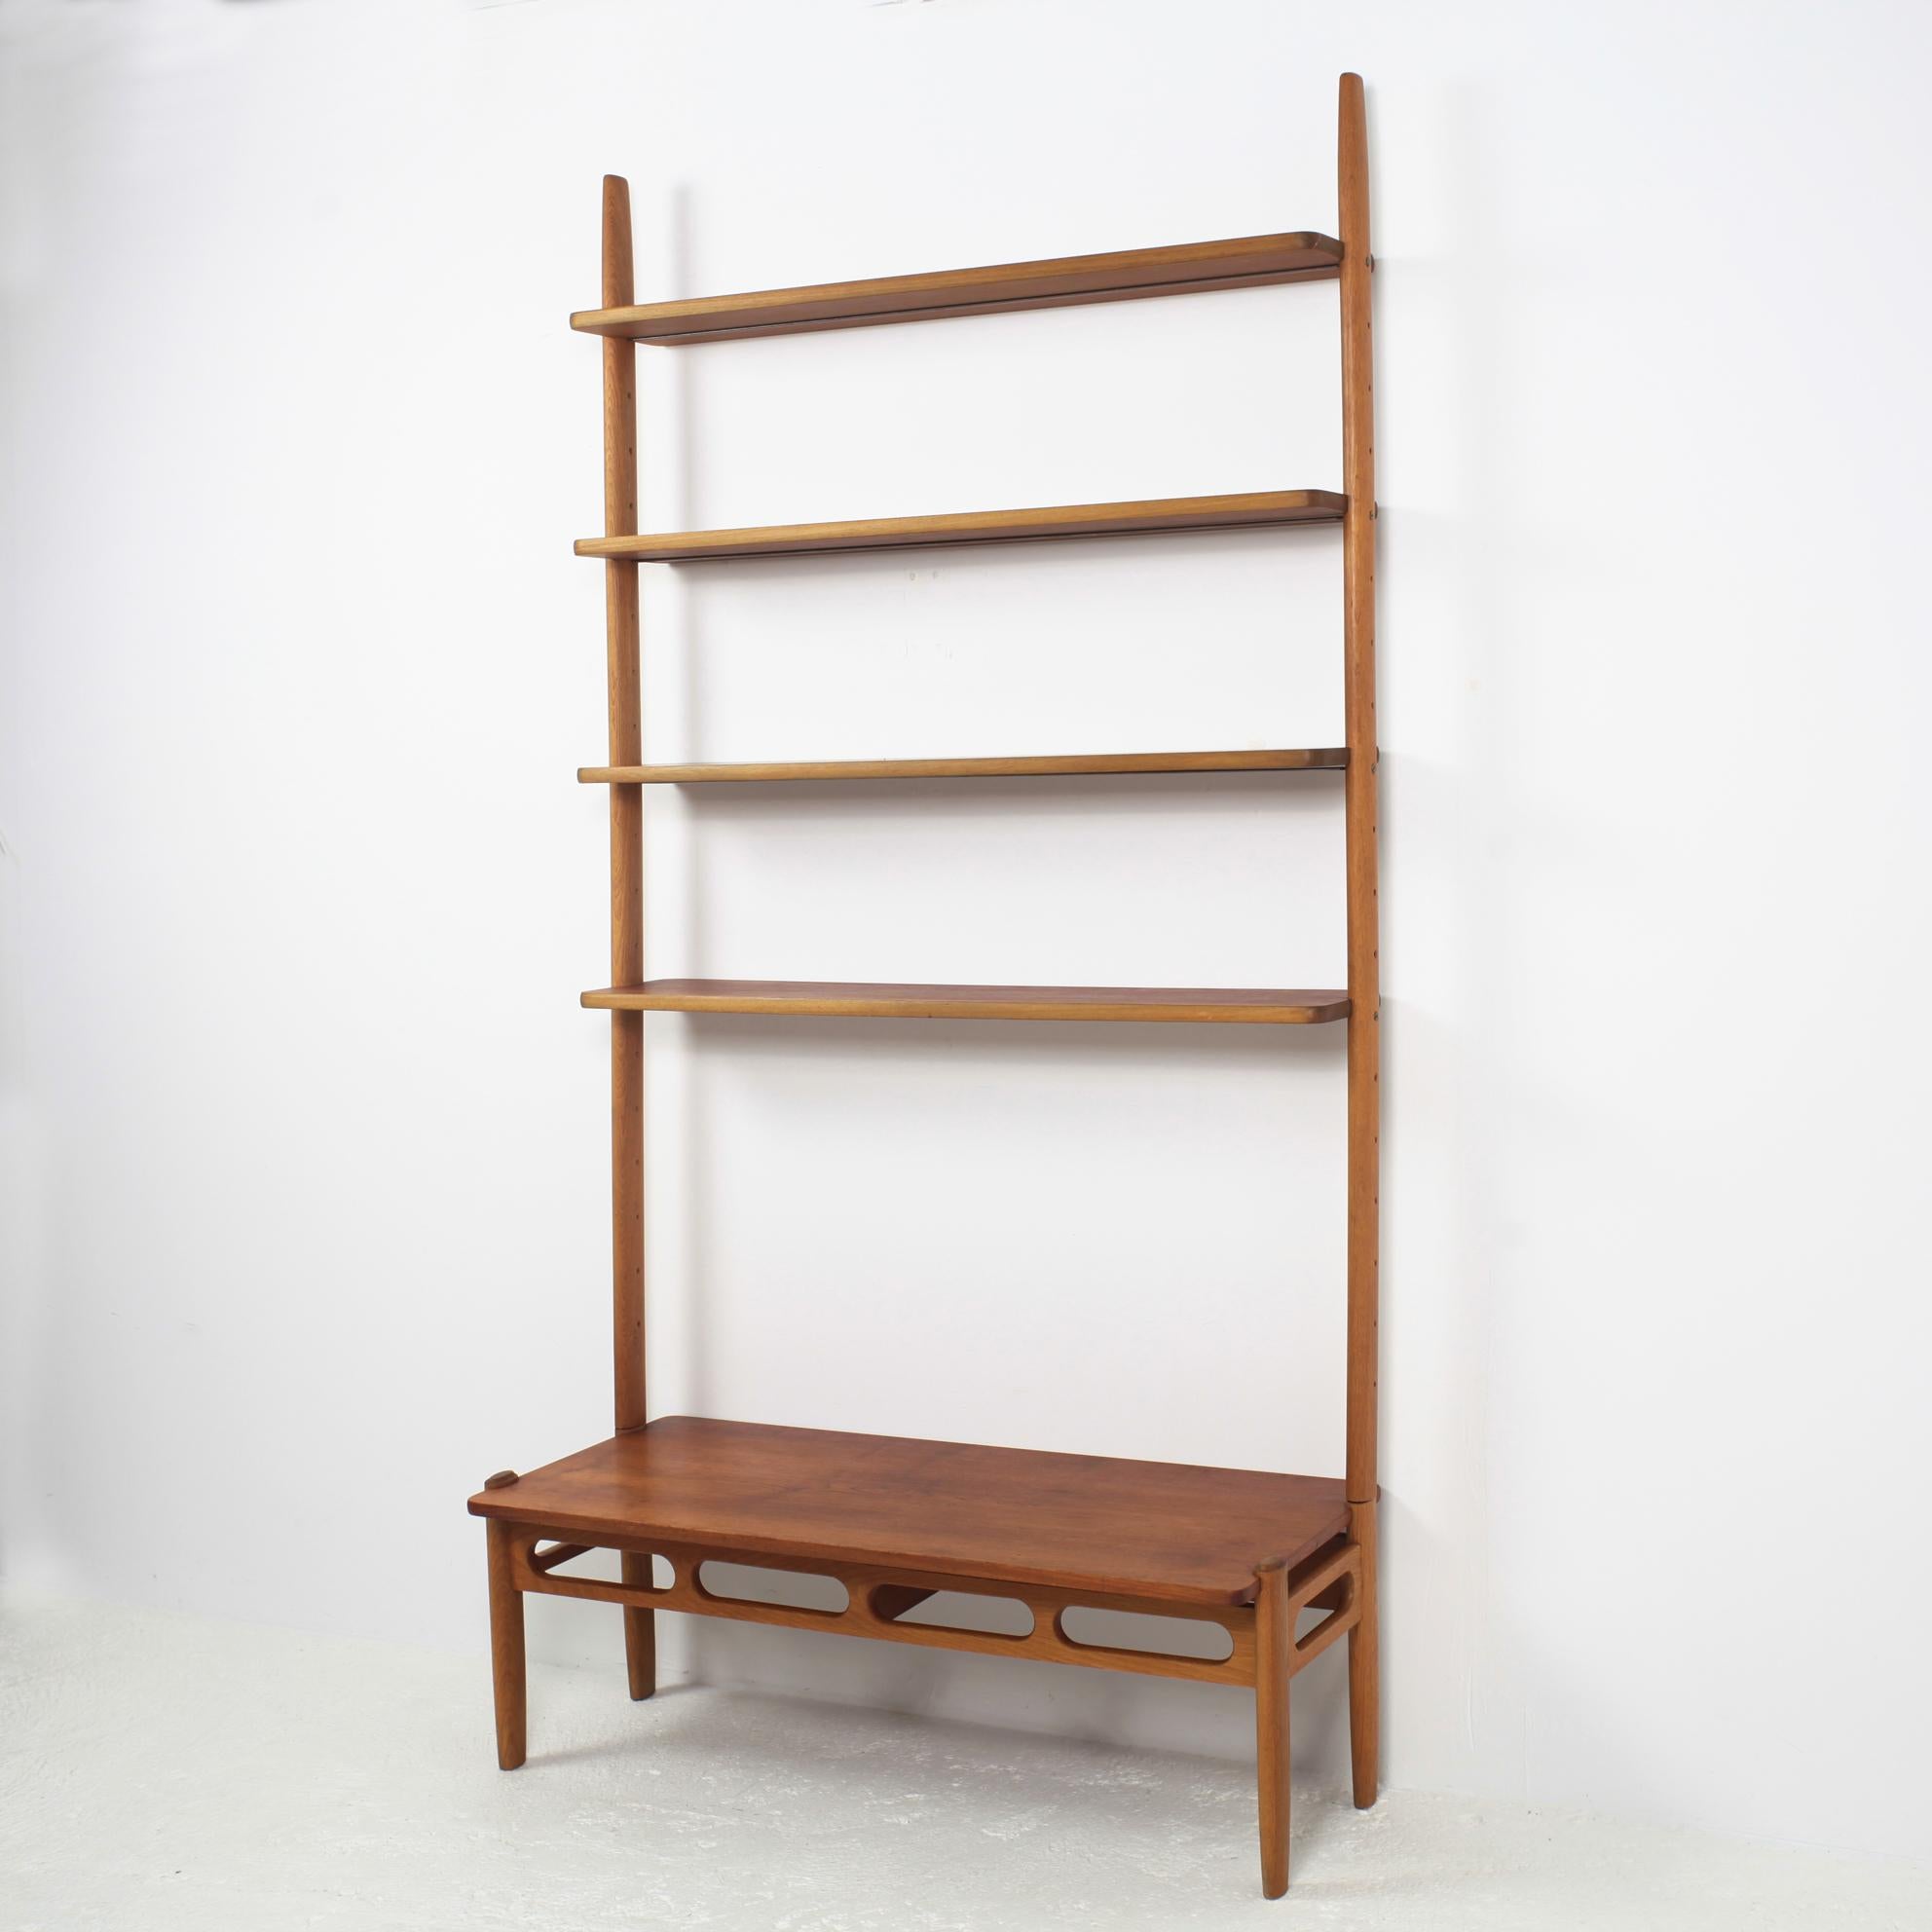 Light and aerial shaped modular bookshelves, solid teak board and solid oak structure
designed by William Watting for A/S Mikael Laursen, 1950, Denmark.